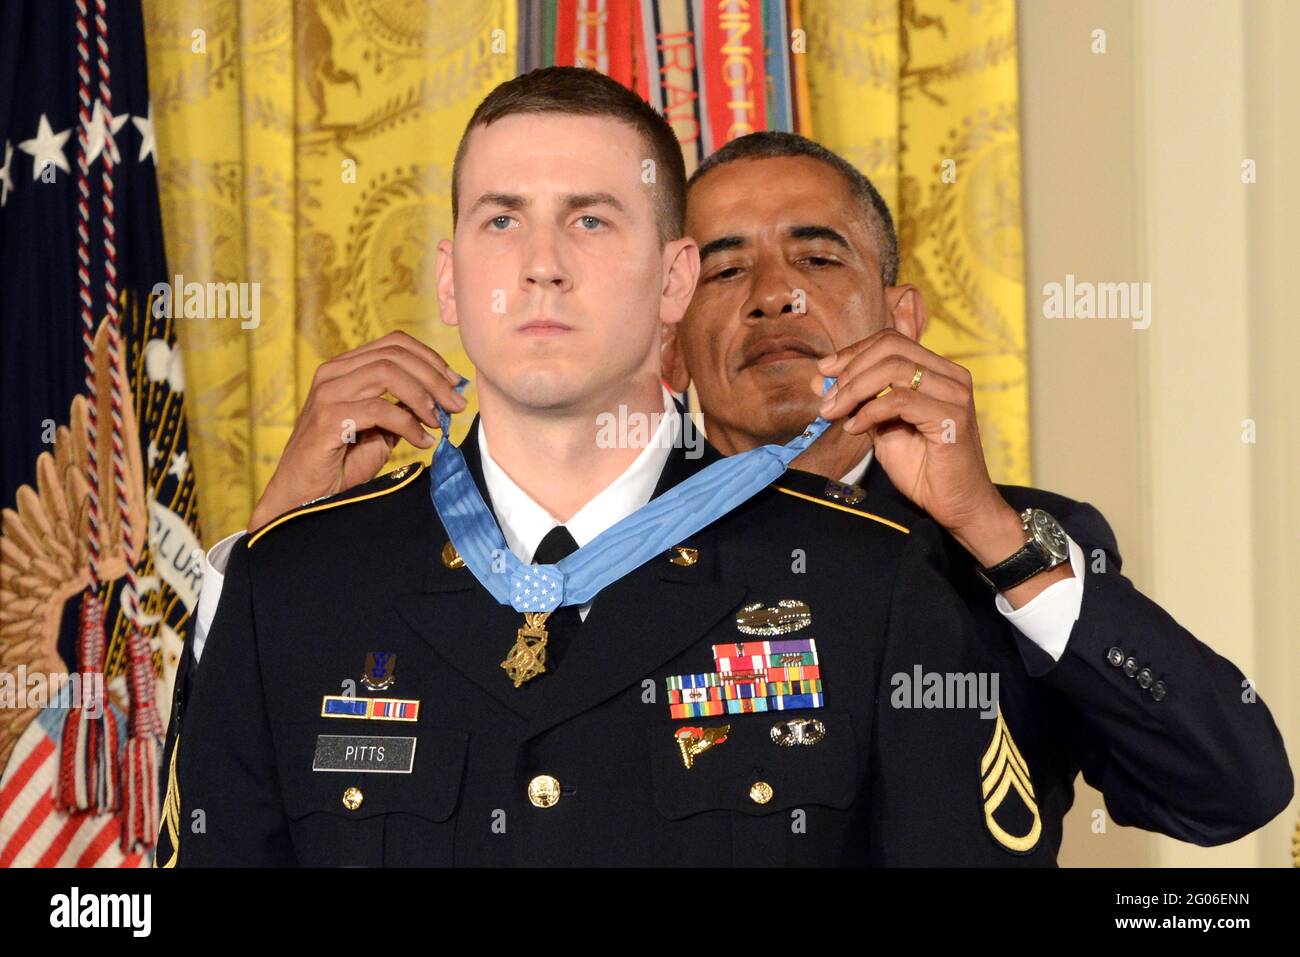 Reportage:  President Barack Obama awards the Medal of Honor to former U.S. Army Staff Sgt. Ryan M. Pitts, the White House, Washington, D.C., July 21, 2014. Pitts received the nation's highest military honor for his actions in 2008 in Wanat, Afghanistan, with 2nd Platoon, Chosen Company, 2nd Battalion (Airborne), 503rd Infantry Regiment, 173rd Airborne Brigade. www.army.mil/medalofhonor/pitts/profile/index.html Stock Photo